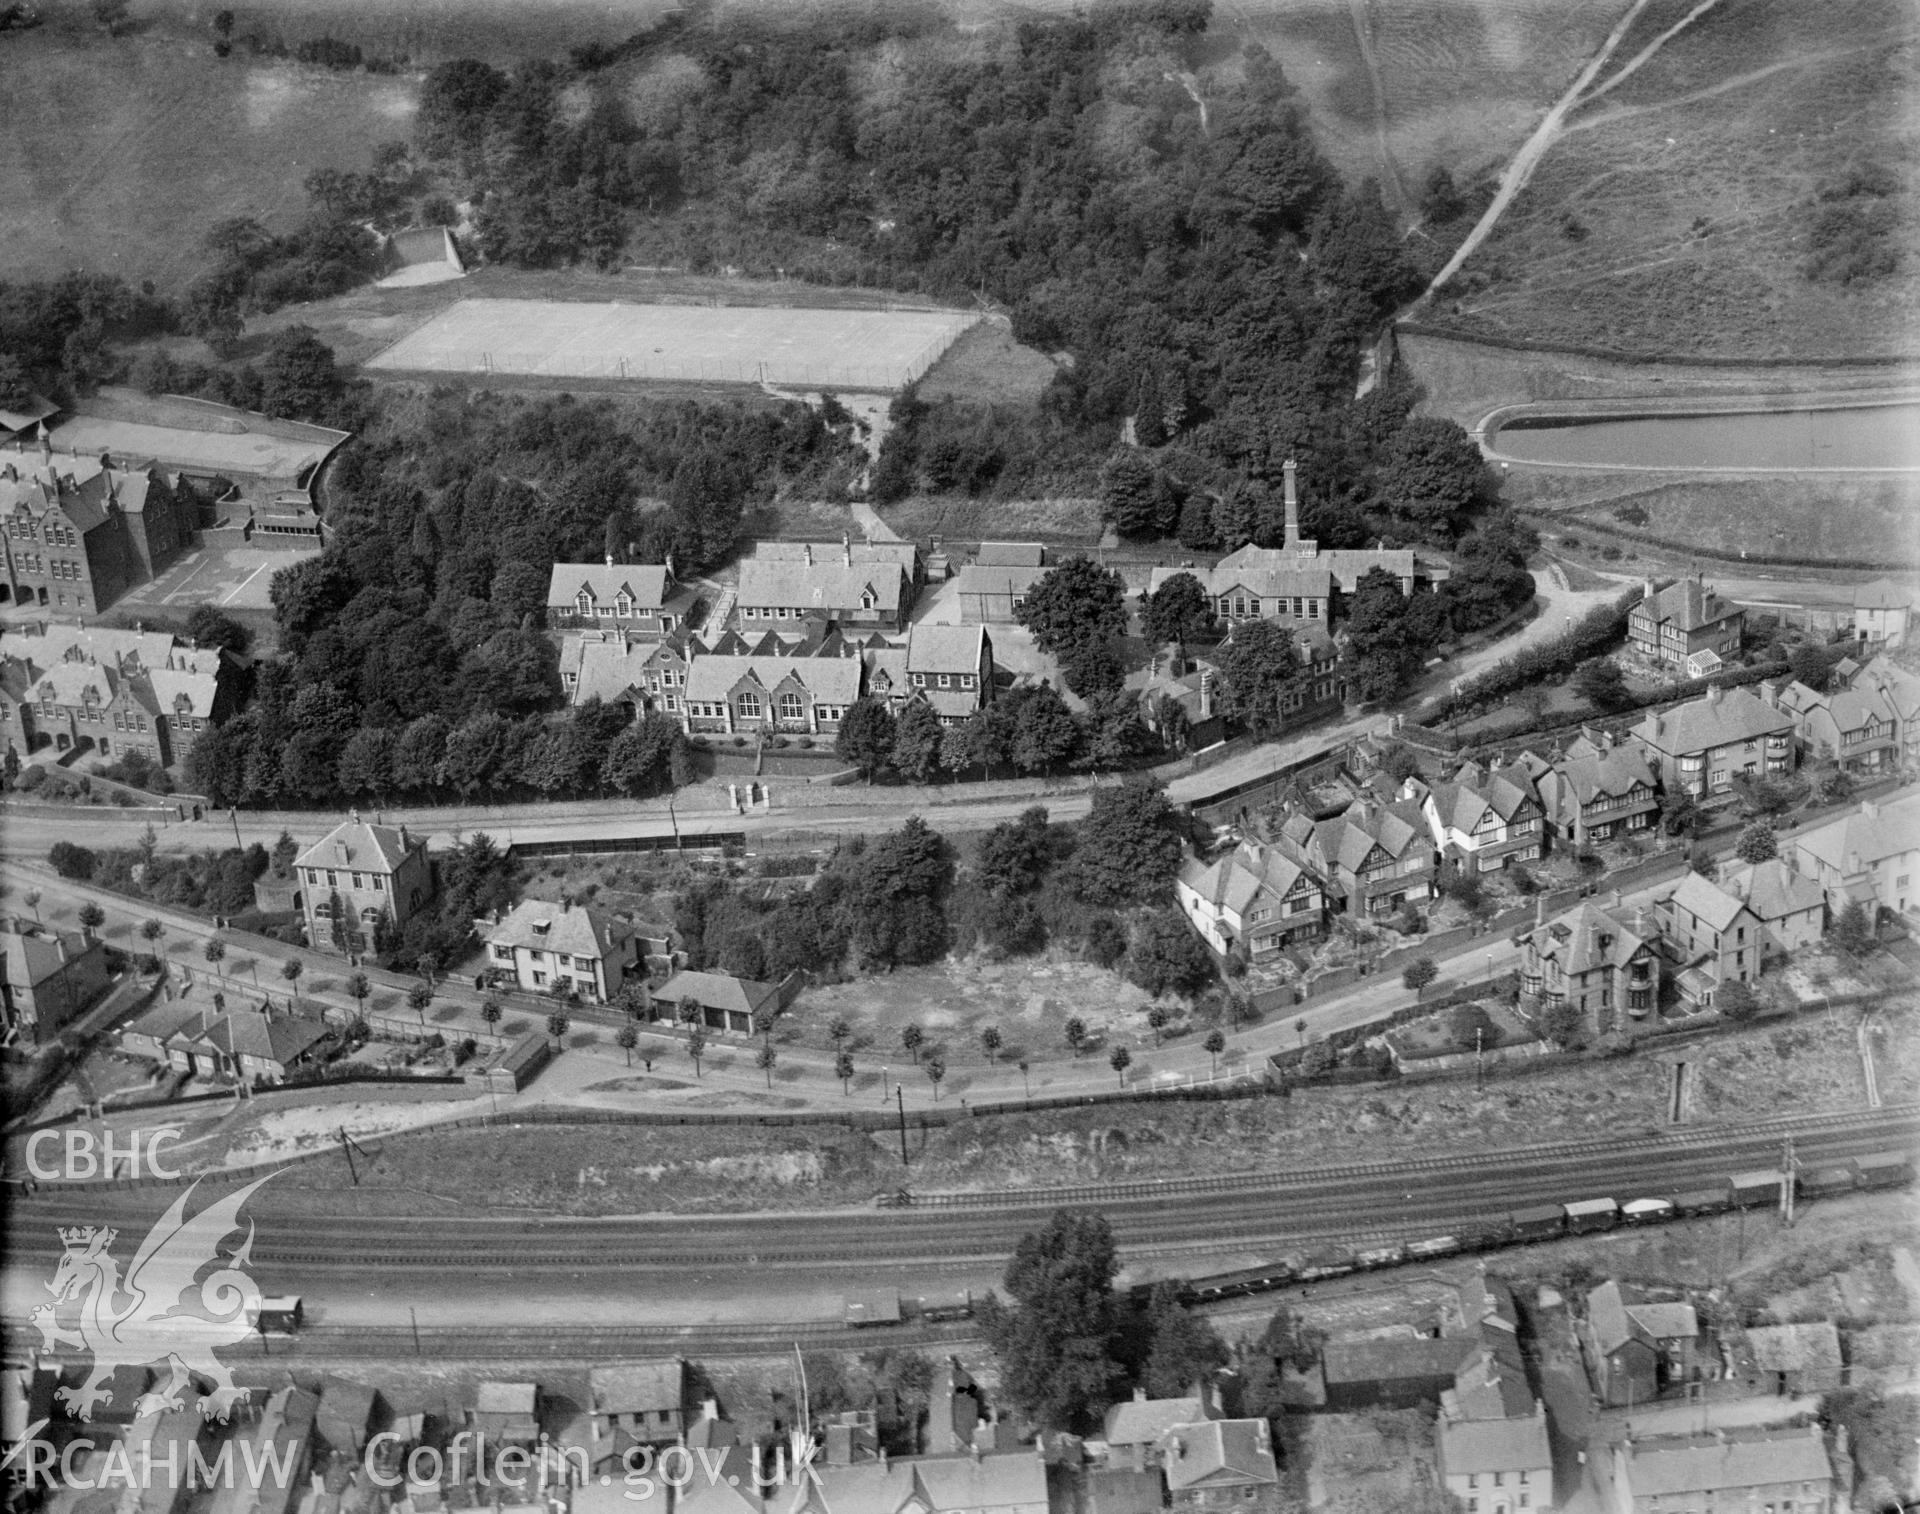 View of Pontypridd showing Grammar school, handball court, tennis courts and Lan Wood reservoir, oblique aerial view. 5?x4? black and white glass plate negative.